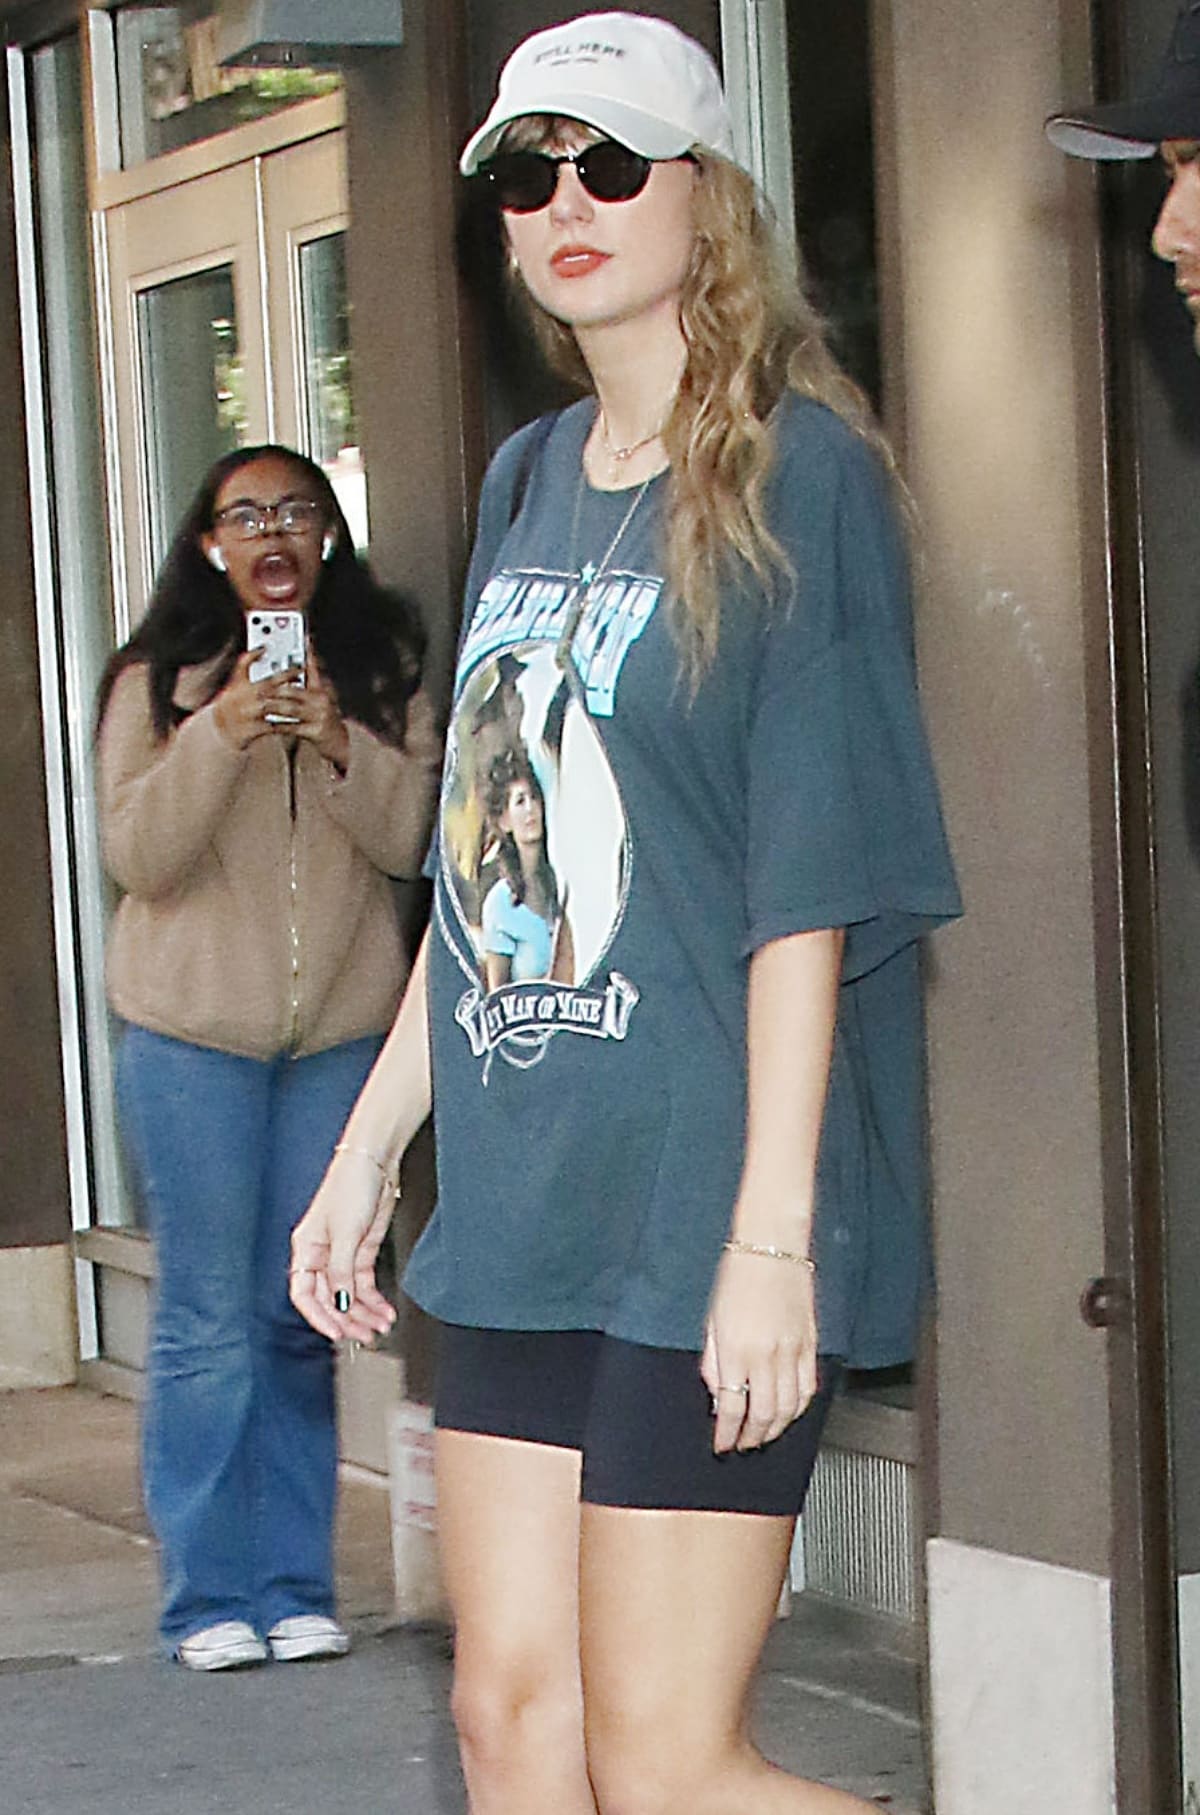 Taylor Swift wearing an oversized T-shirt from Free People featuring a graphic of Shania Twain’s hit song “Any Man of Mine”